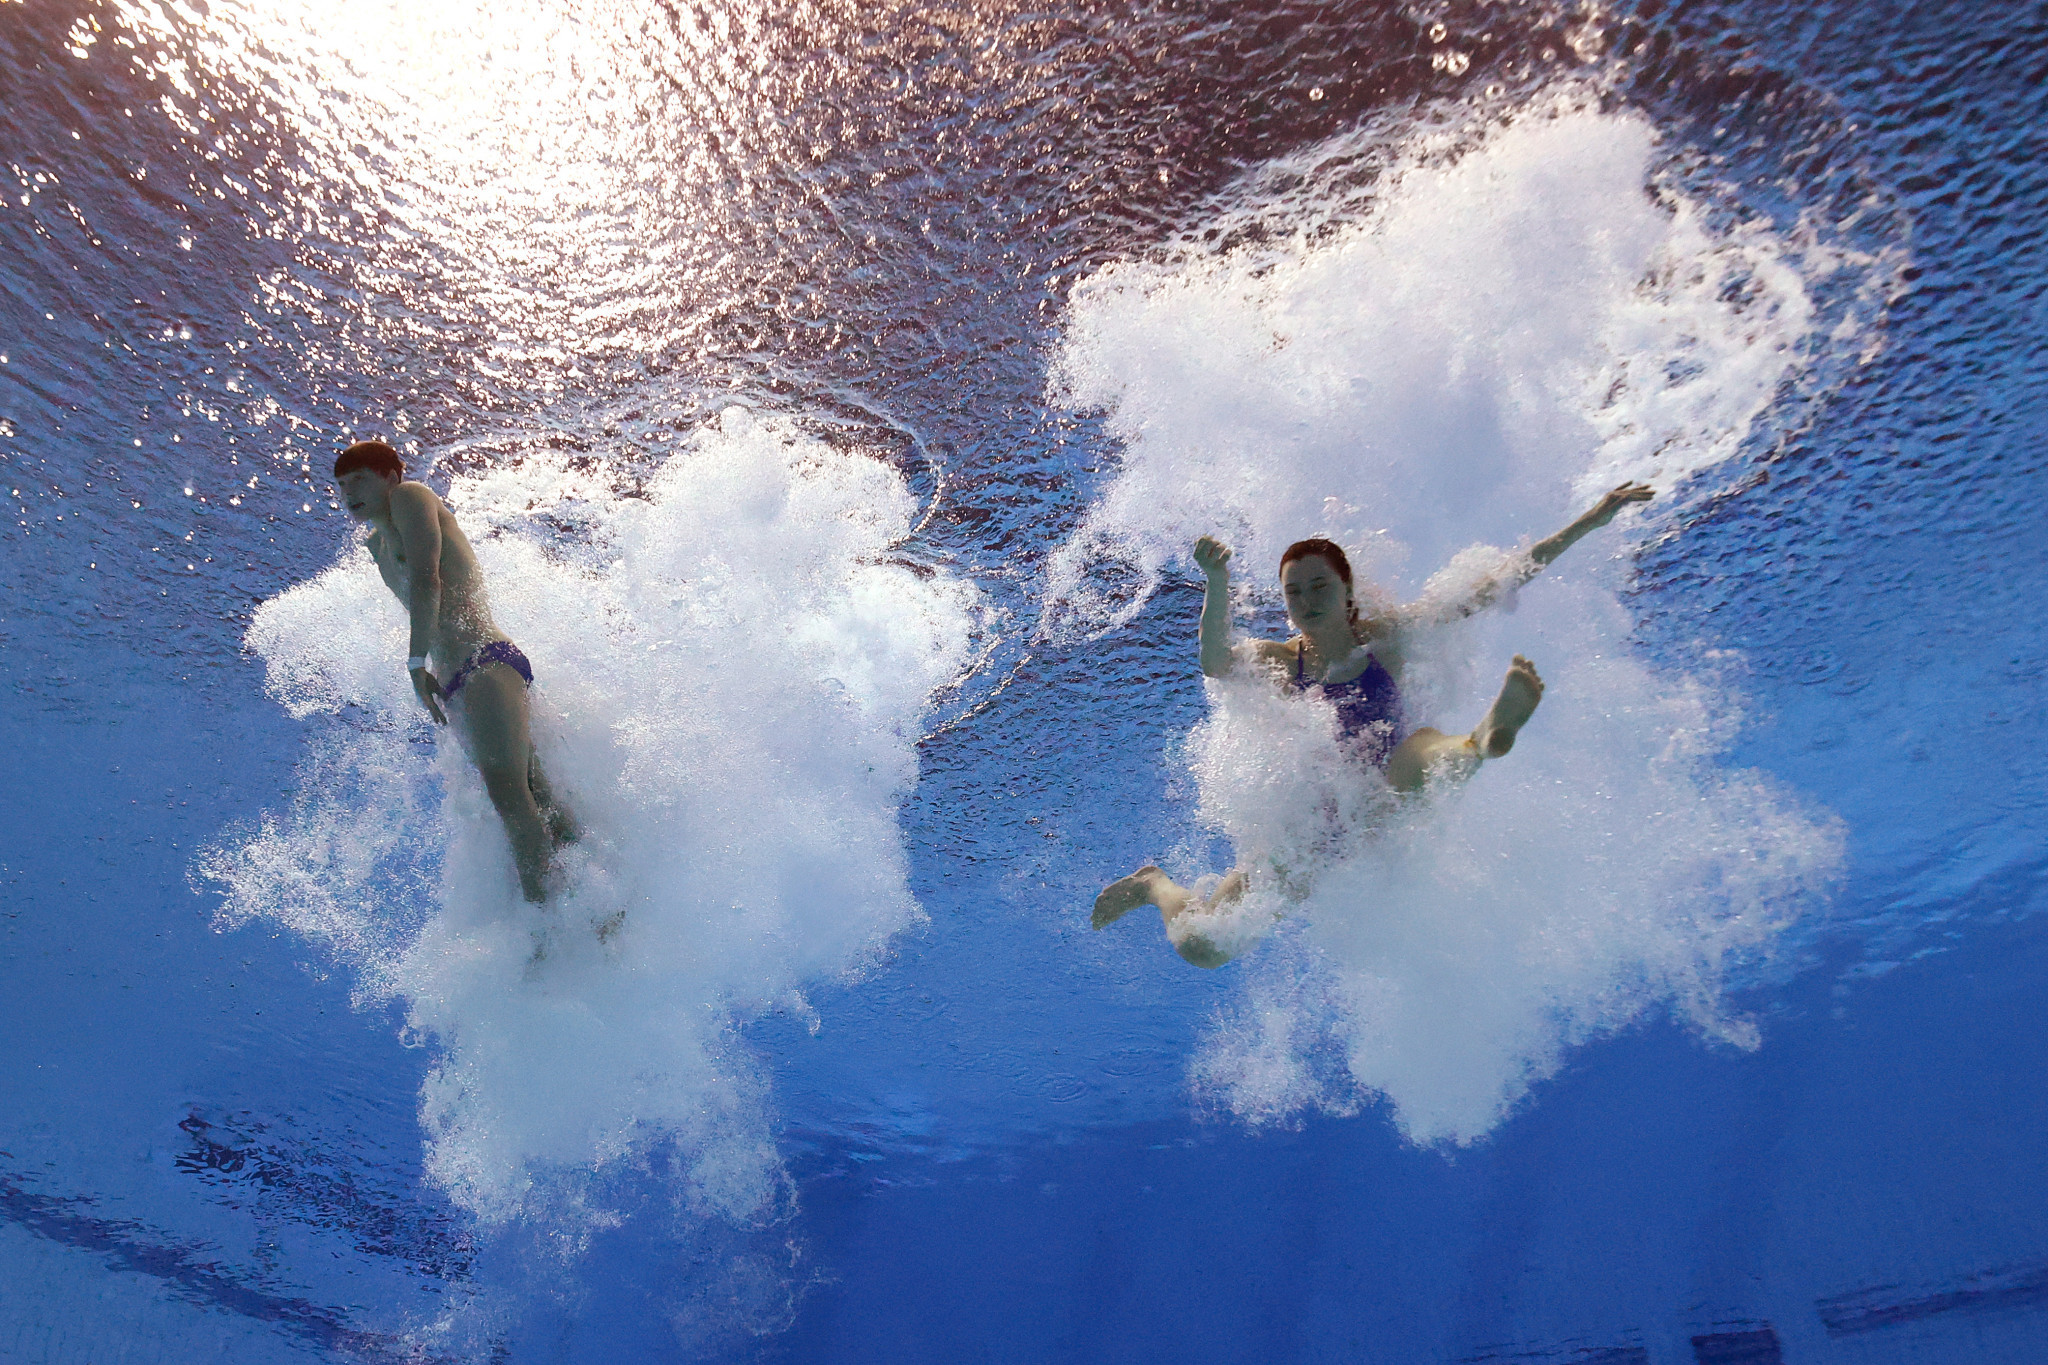 Ukraine's Oleksiy Sereda, left, and Sofiya Lyskun, right, placed second in the mixed 10m platform synchronised event ©Getty Images